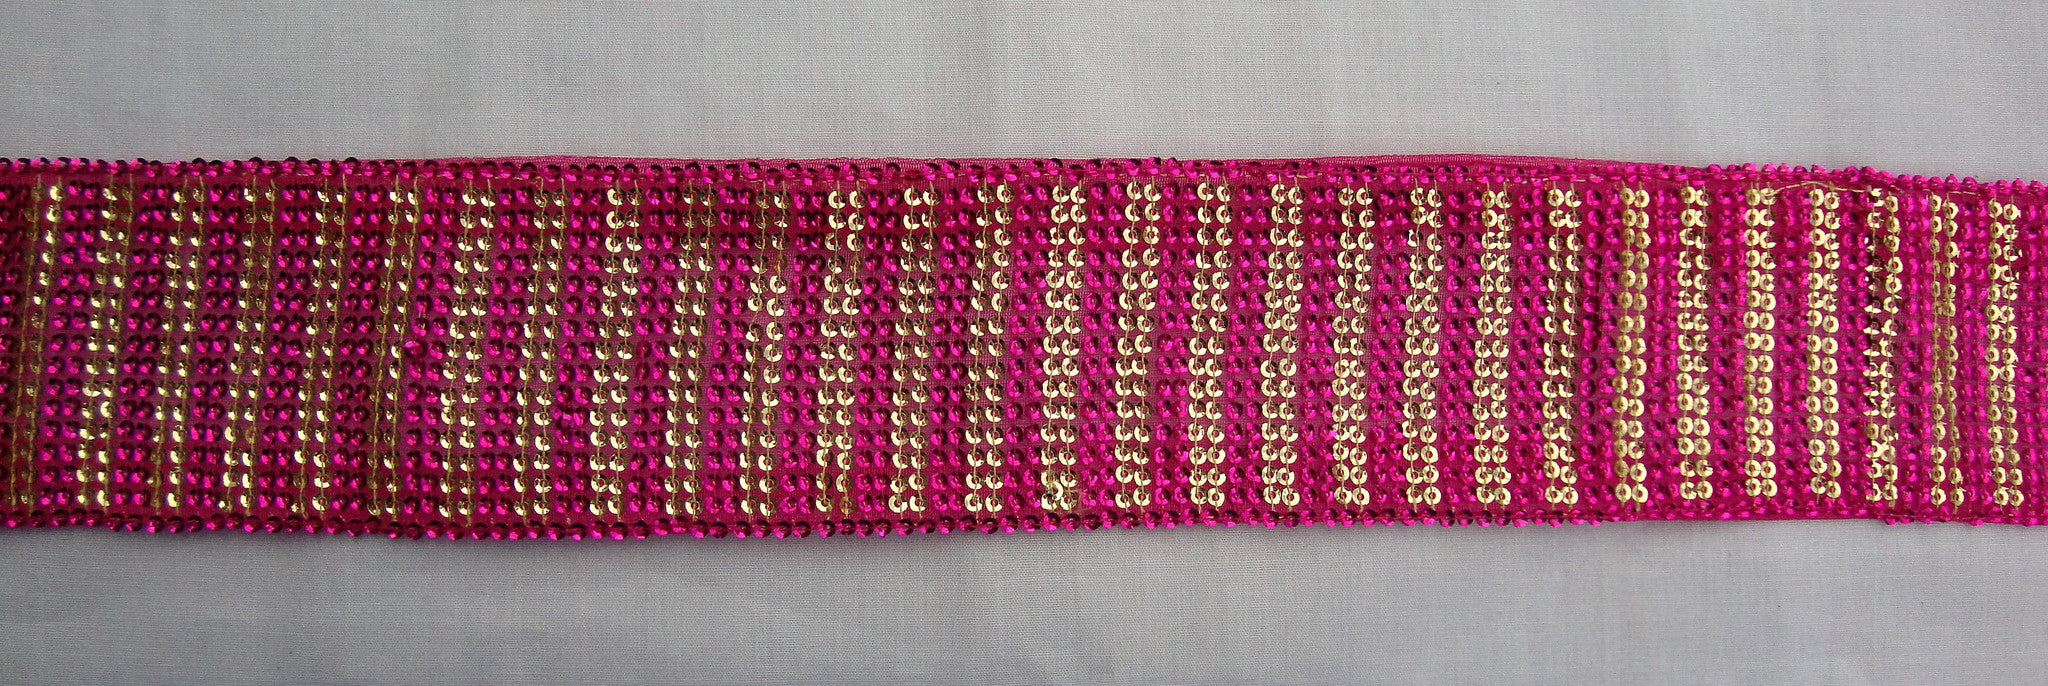 Fuchsia Trimming with small sequins (Sold as a 3 yard piece)